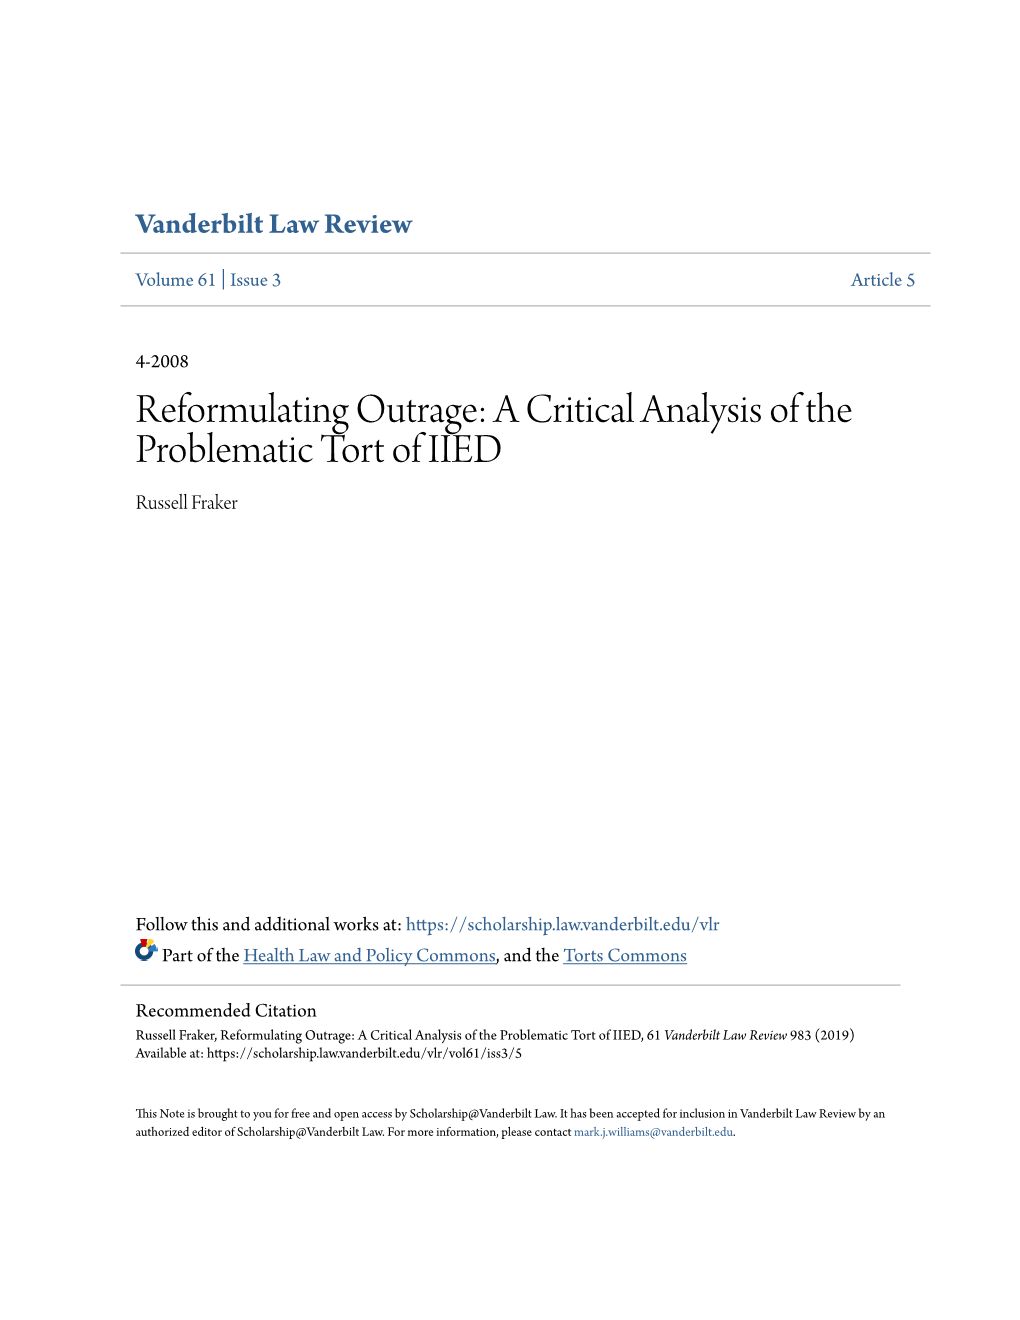 Reformulating Outrage: a Critical Analysis of the Problematic Tort of IIED Russell Fraker